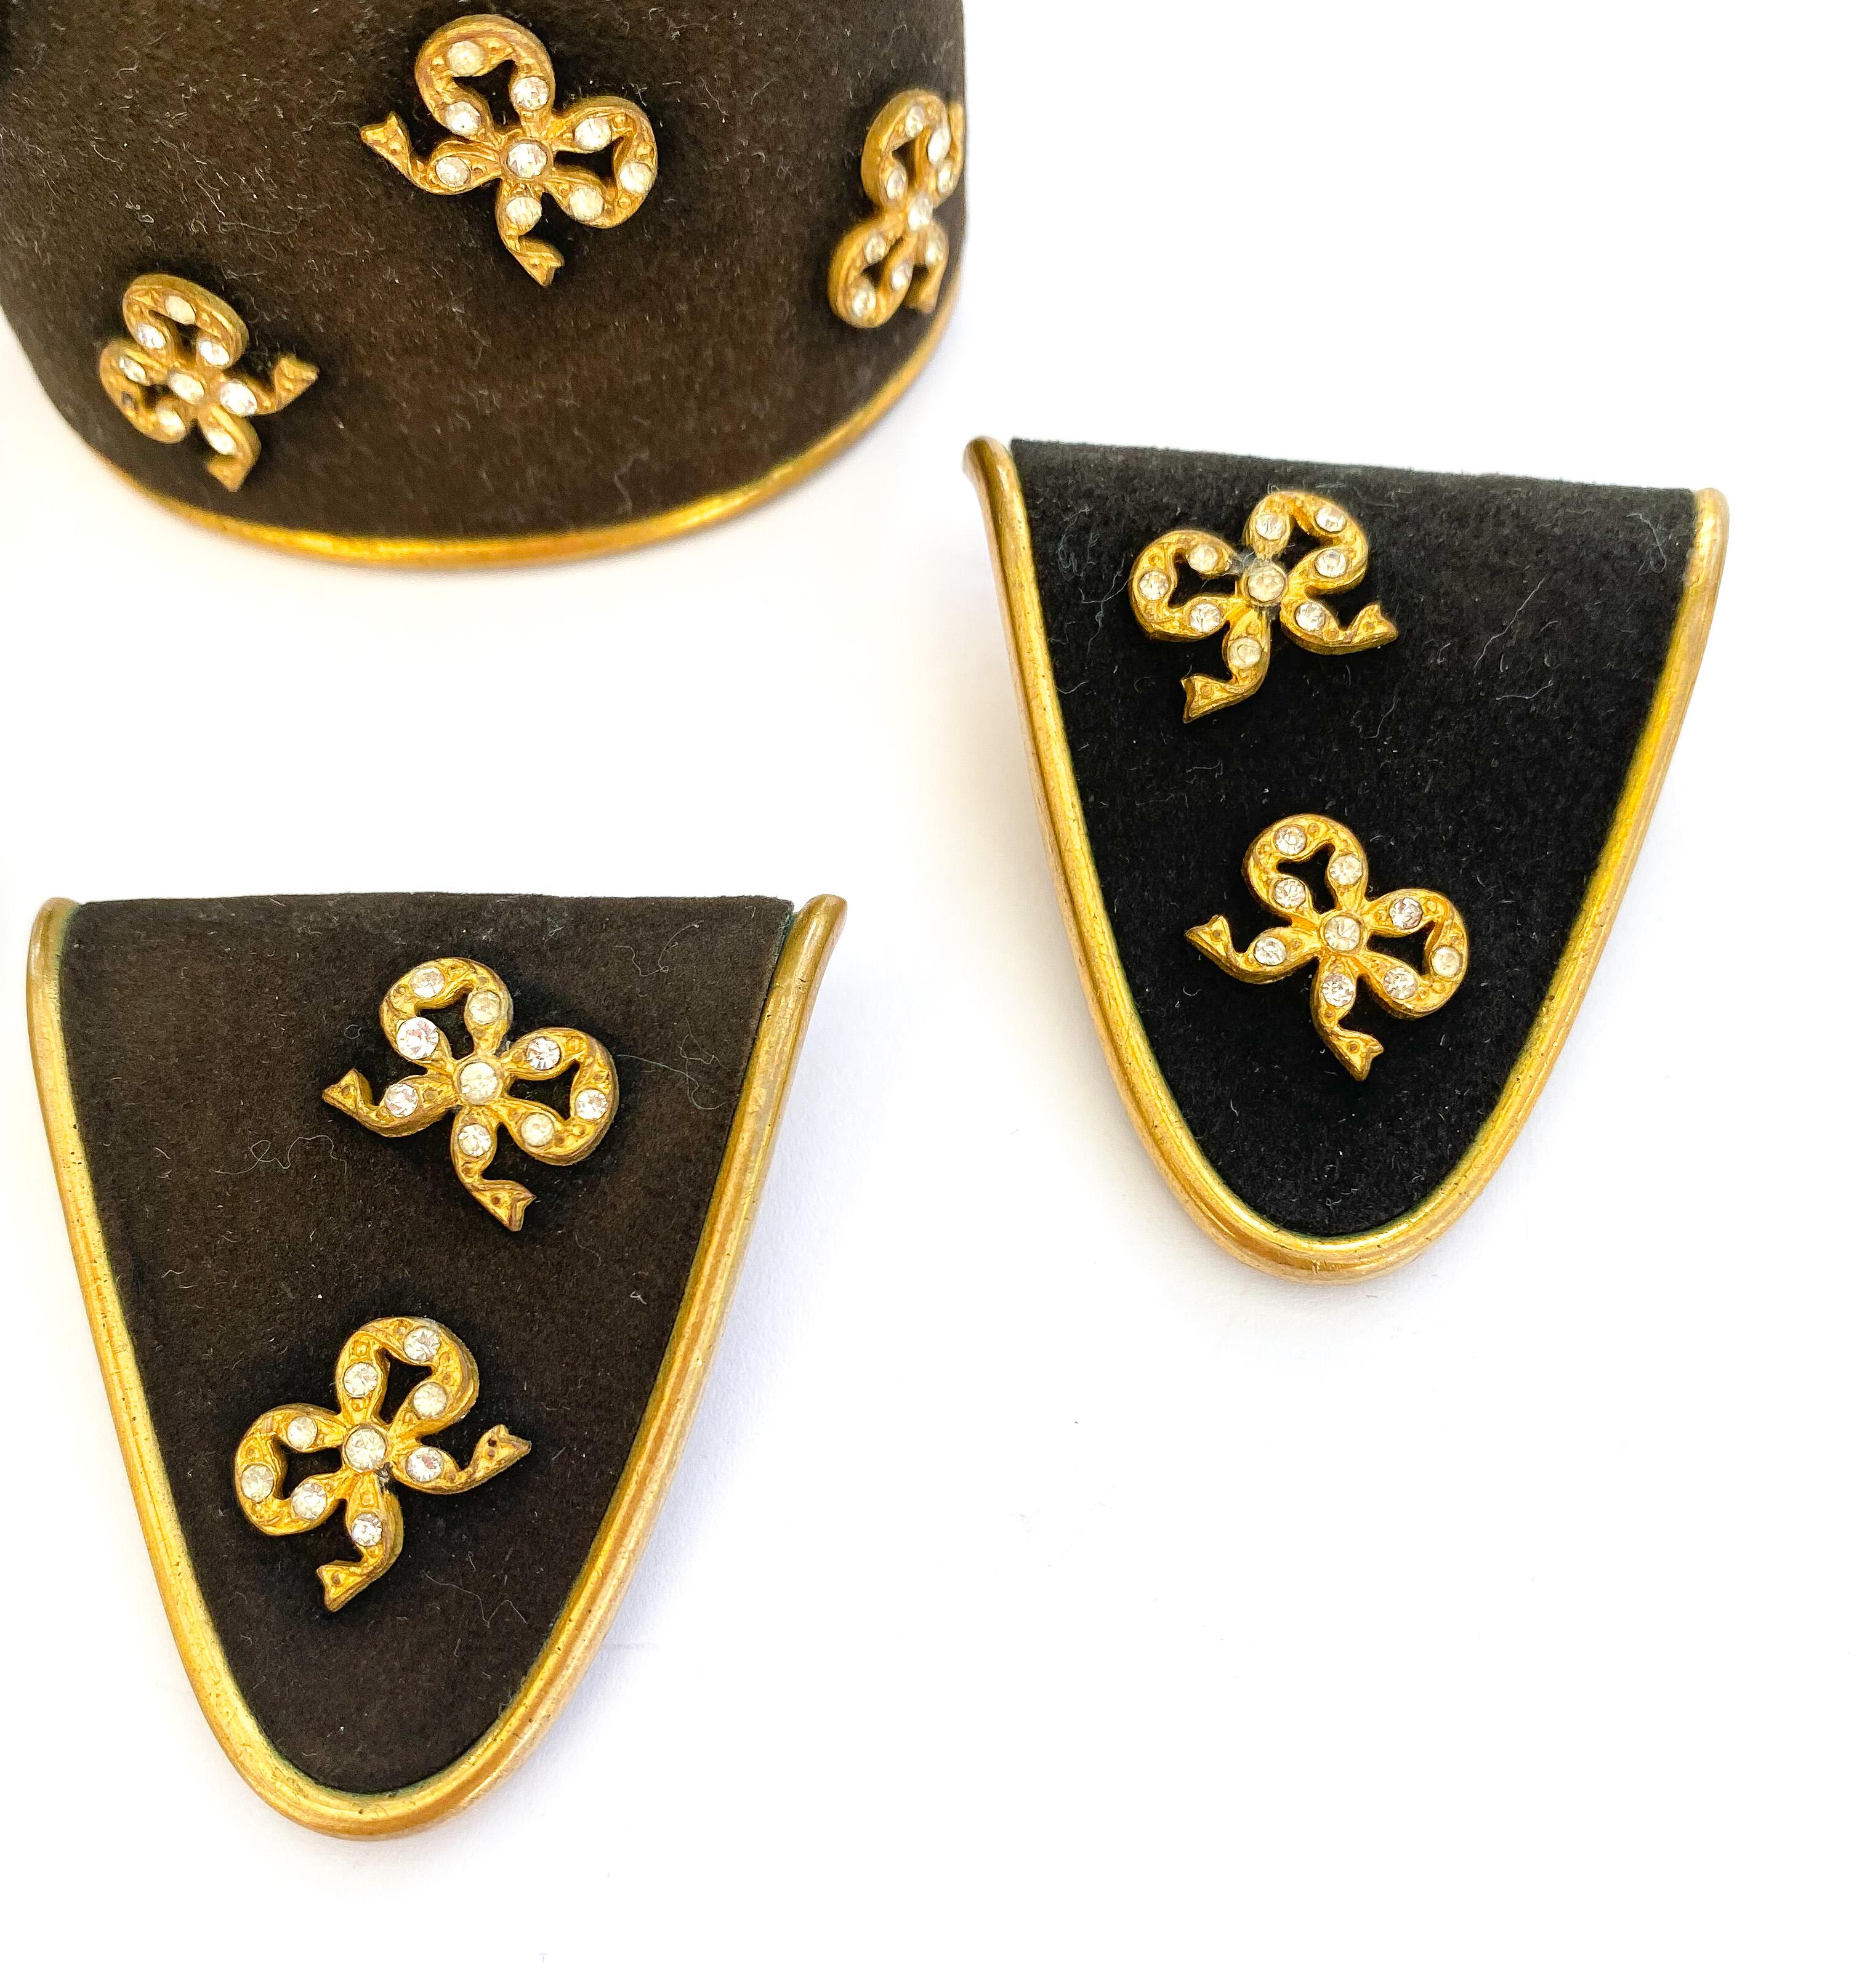 An immaculate and charming black suede and gilt metal suite of jewellery, highlighted with clear paste highlights by Henri de la Pensee from the 1930s - a hinged cuff, two clips and earrings. A classic example of this distinctive brand with